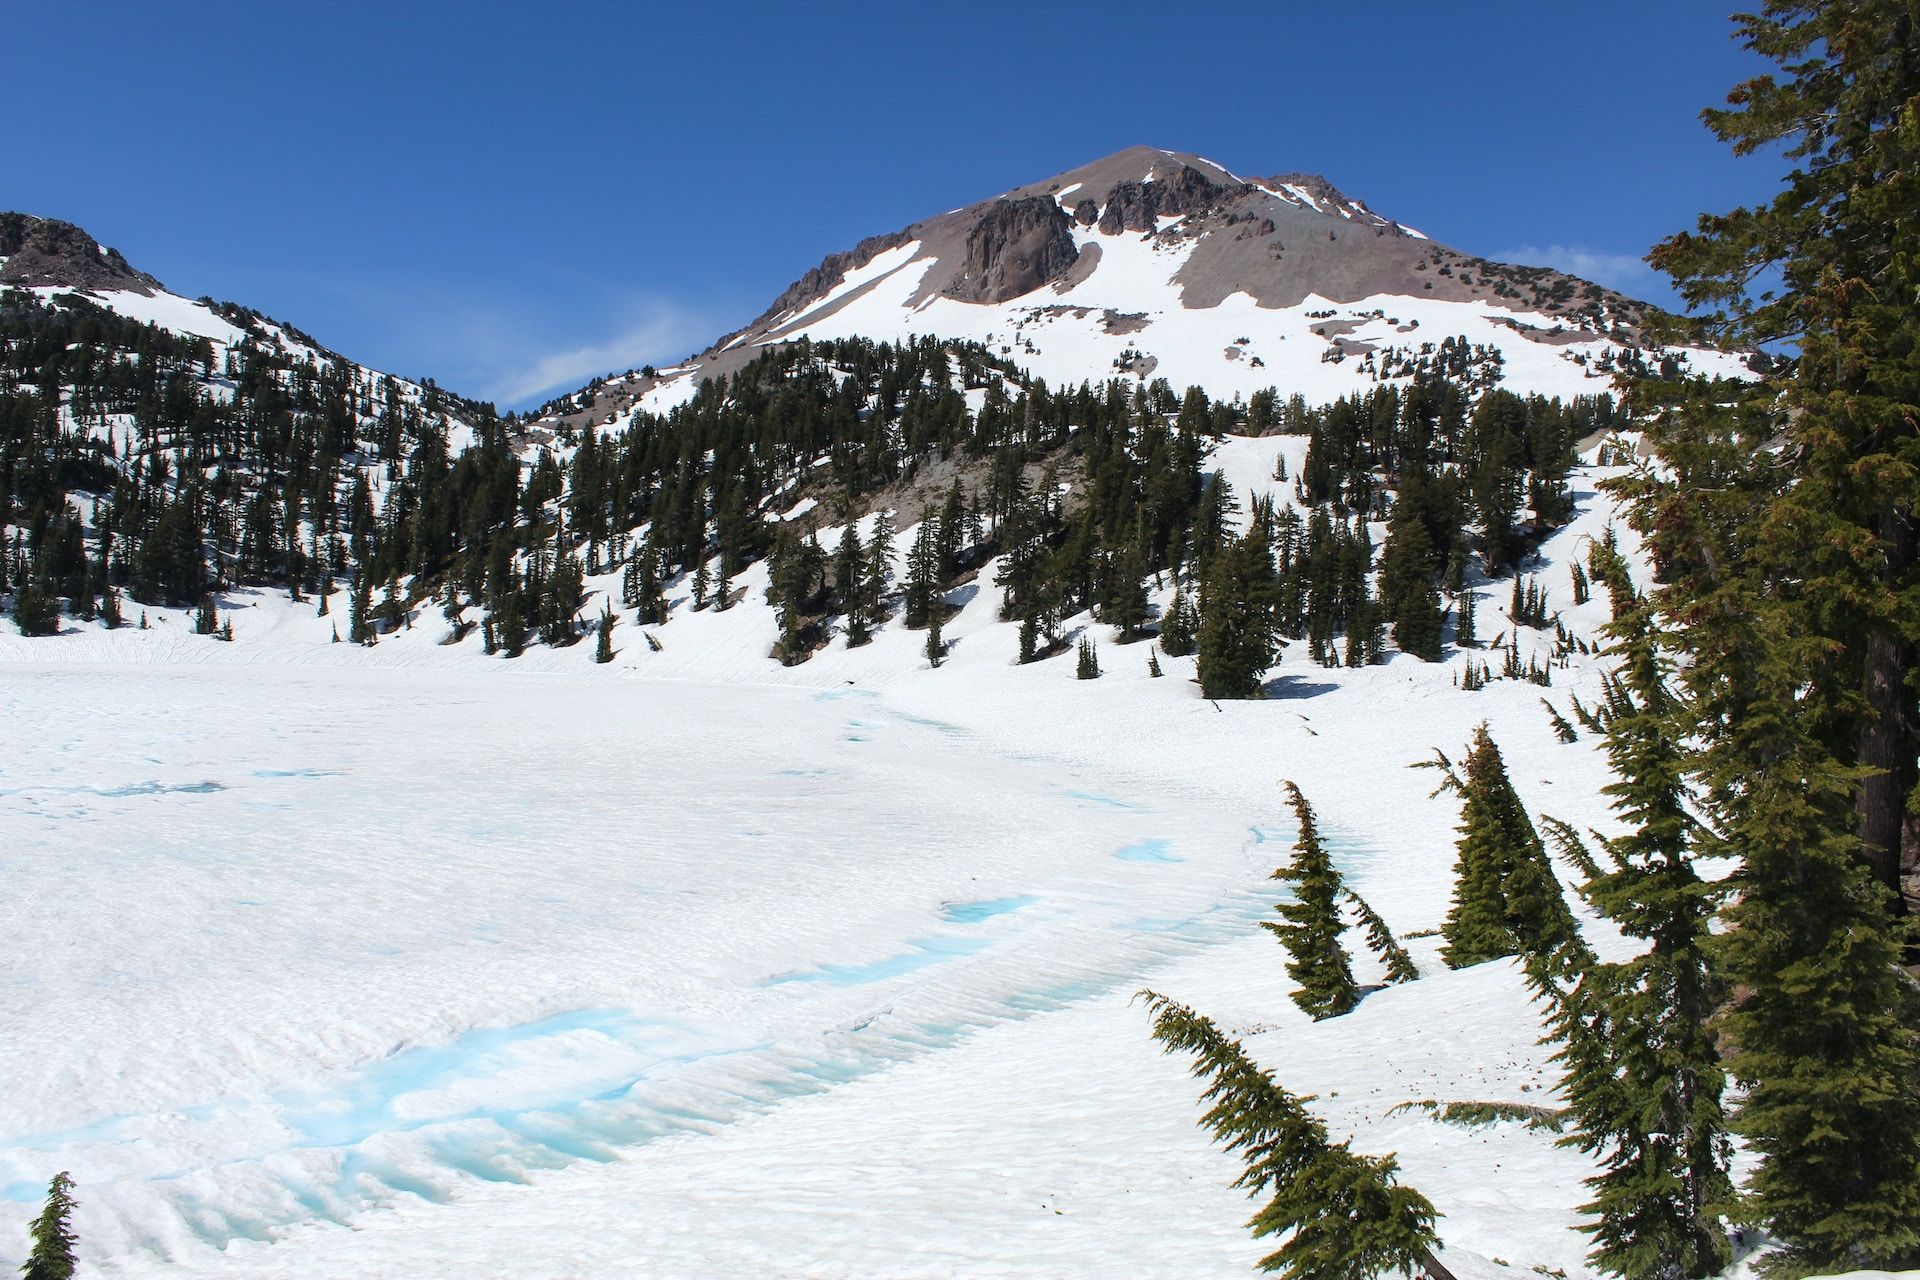 Snowy trail surrounded by trees with Lassen Peak visible in the background